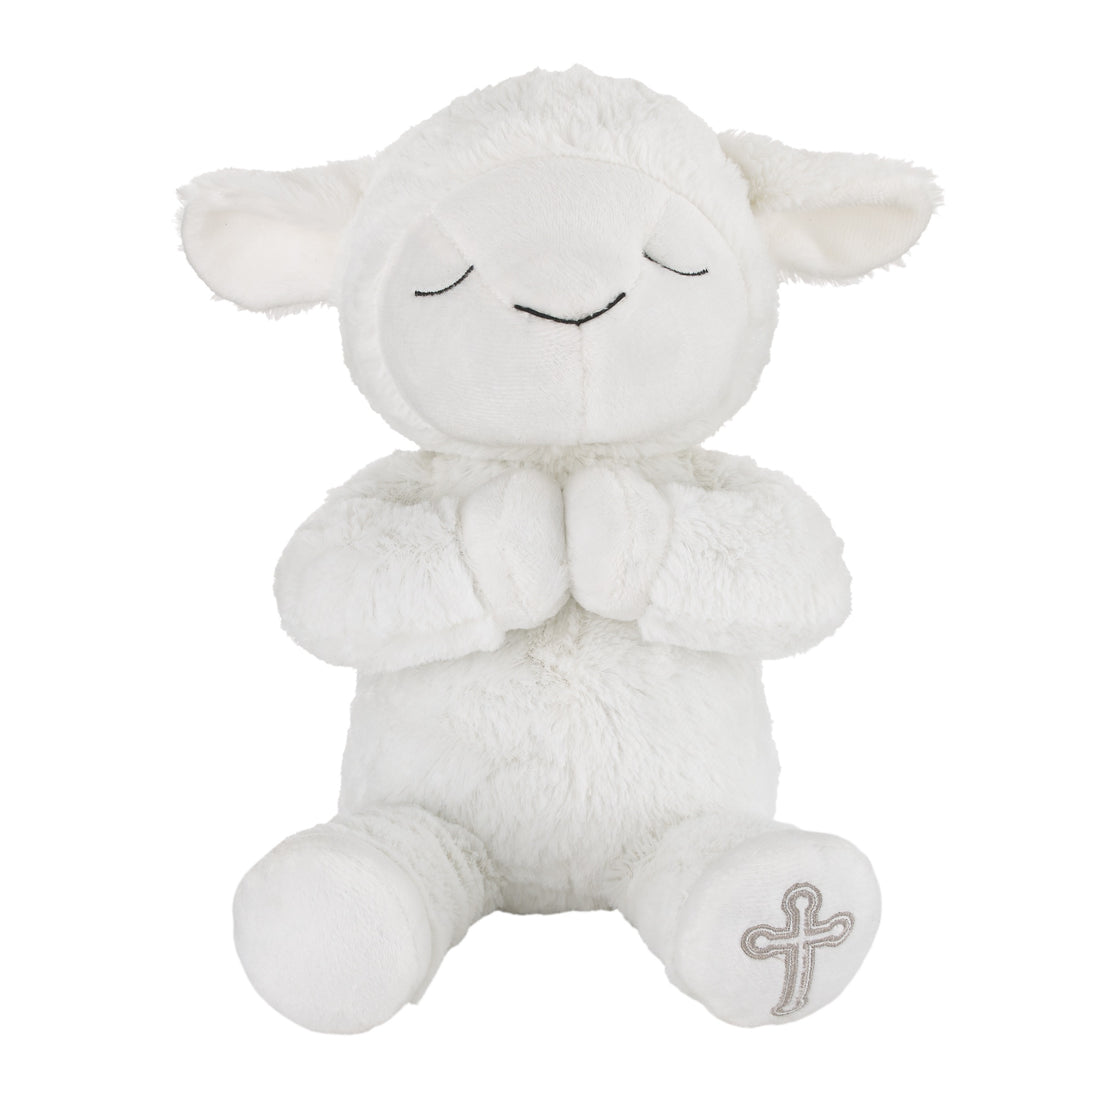 Our Baptism Praying Lamb Plush is featured on Southern Living!